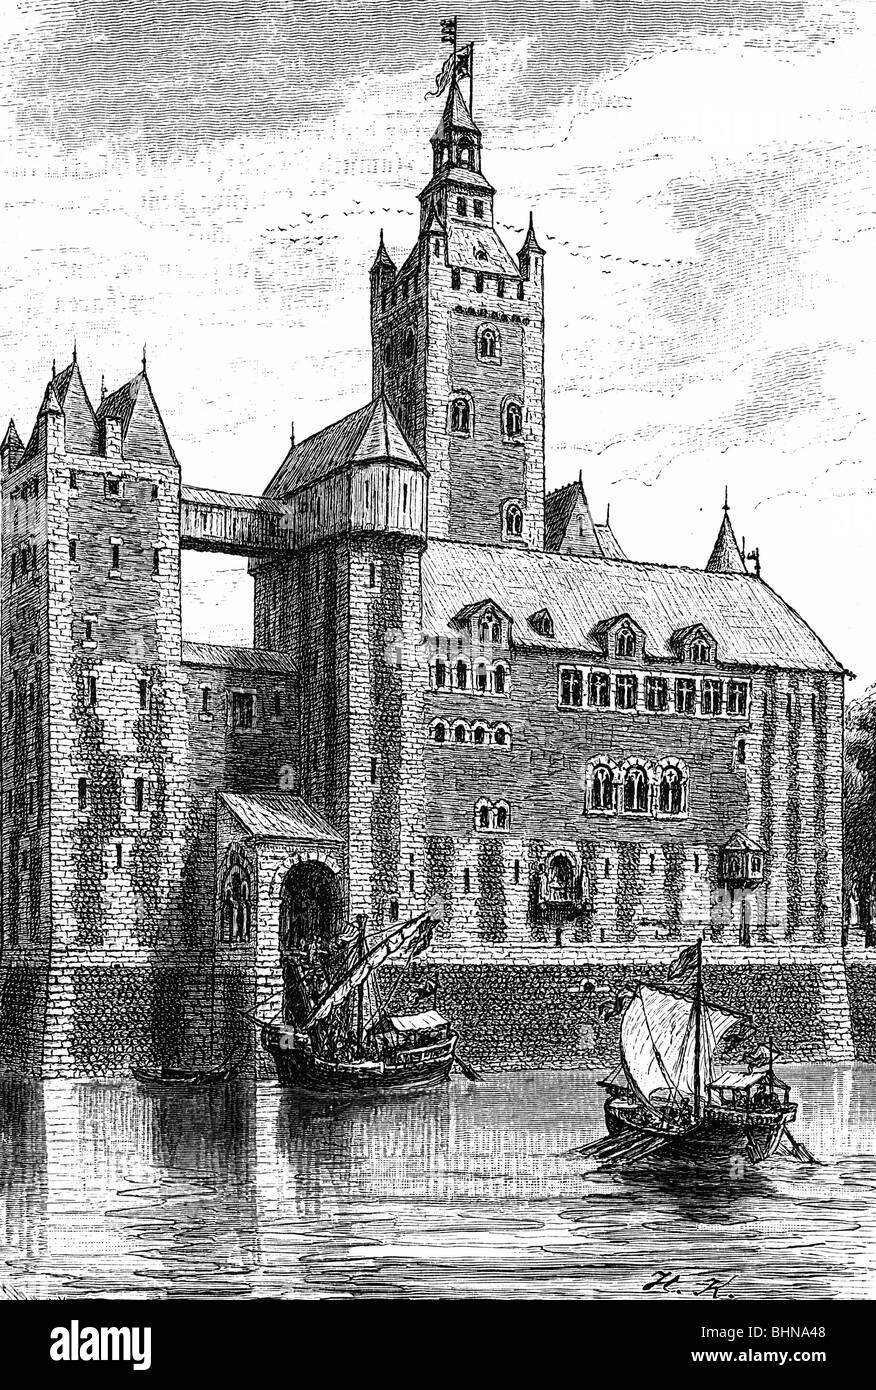 geography / travel, Germany, Duesseldorf, Kaiserwerth Palace, built: 1045 AD, destroyed circa 1700, in times of emperor Friedrich I 'Barbarossa', 12th century, reconstruction, wood engraving, 19th century, , Stock Photo